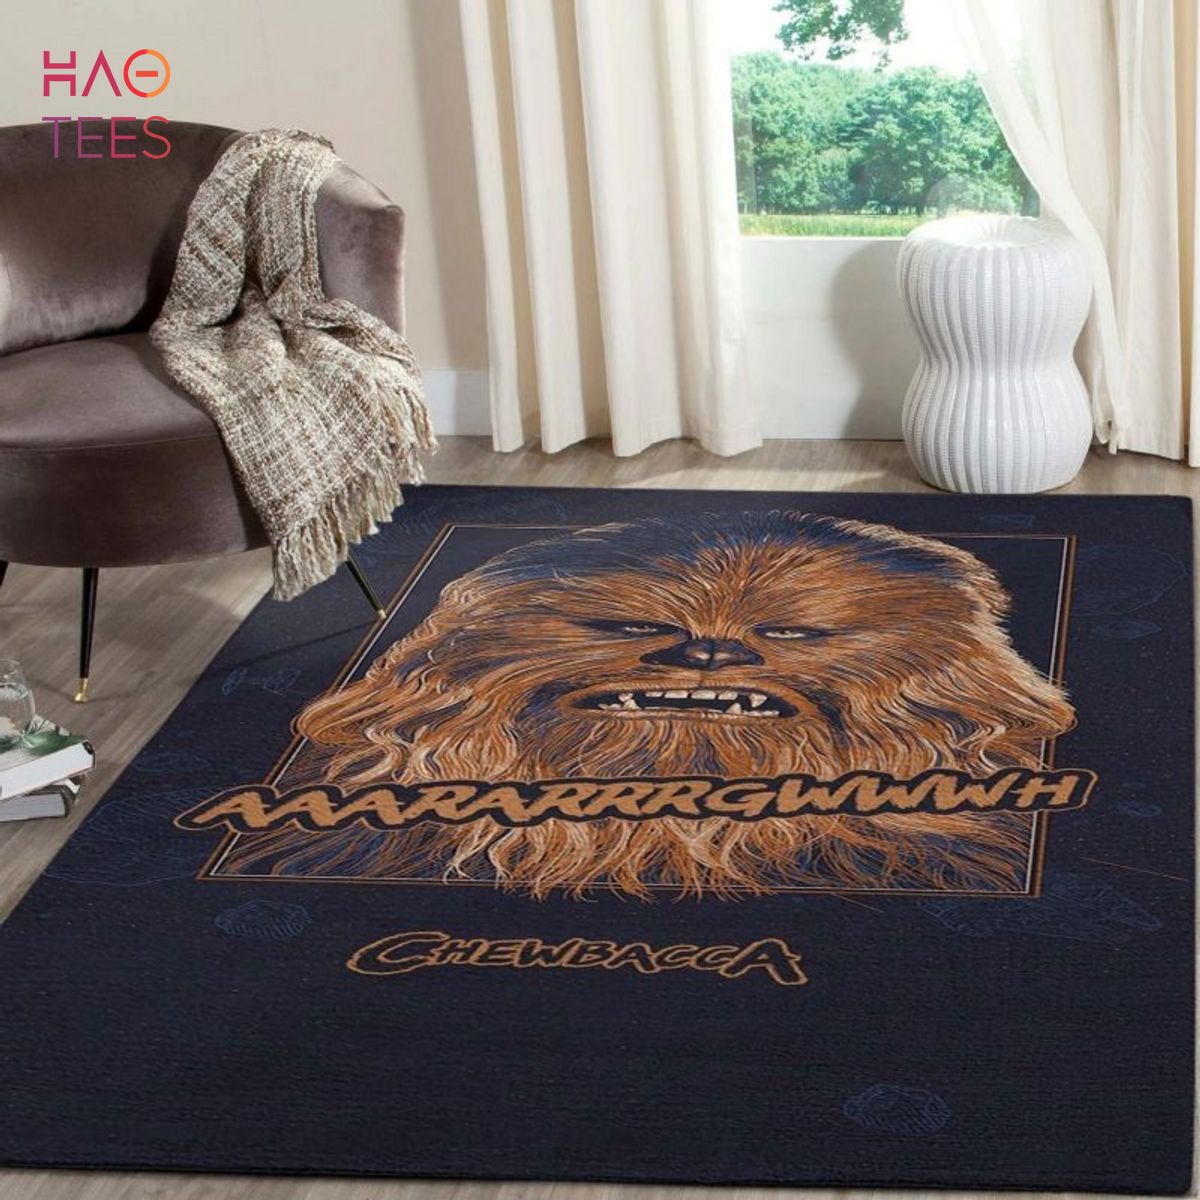 BEST Chewbacca star wars movies area rugs carpet living room rugs